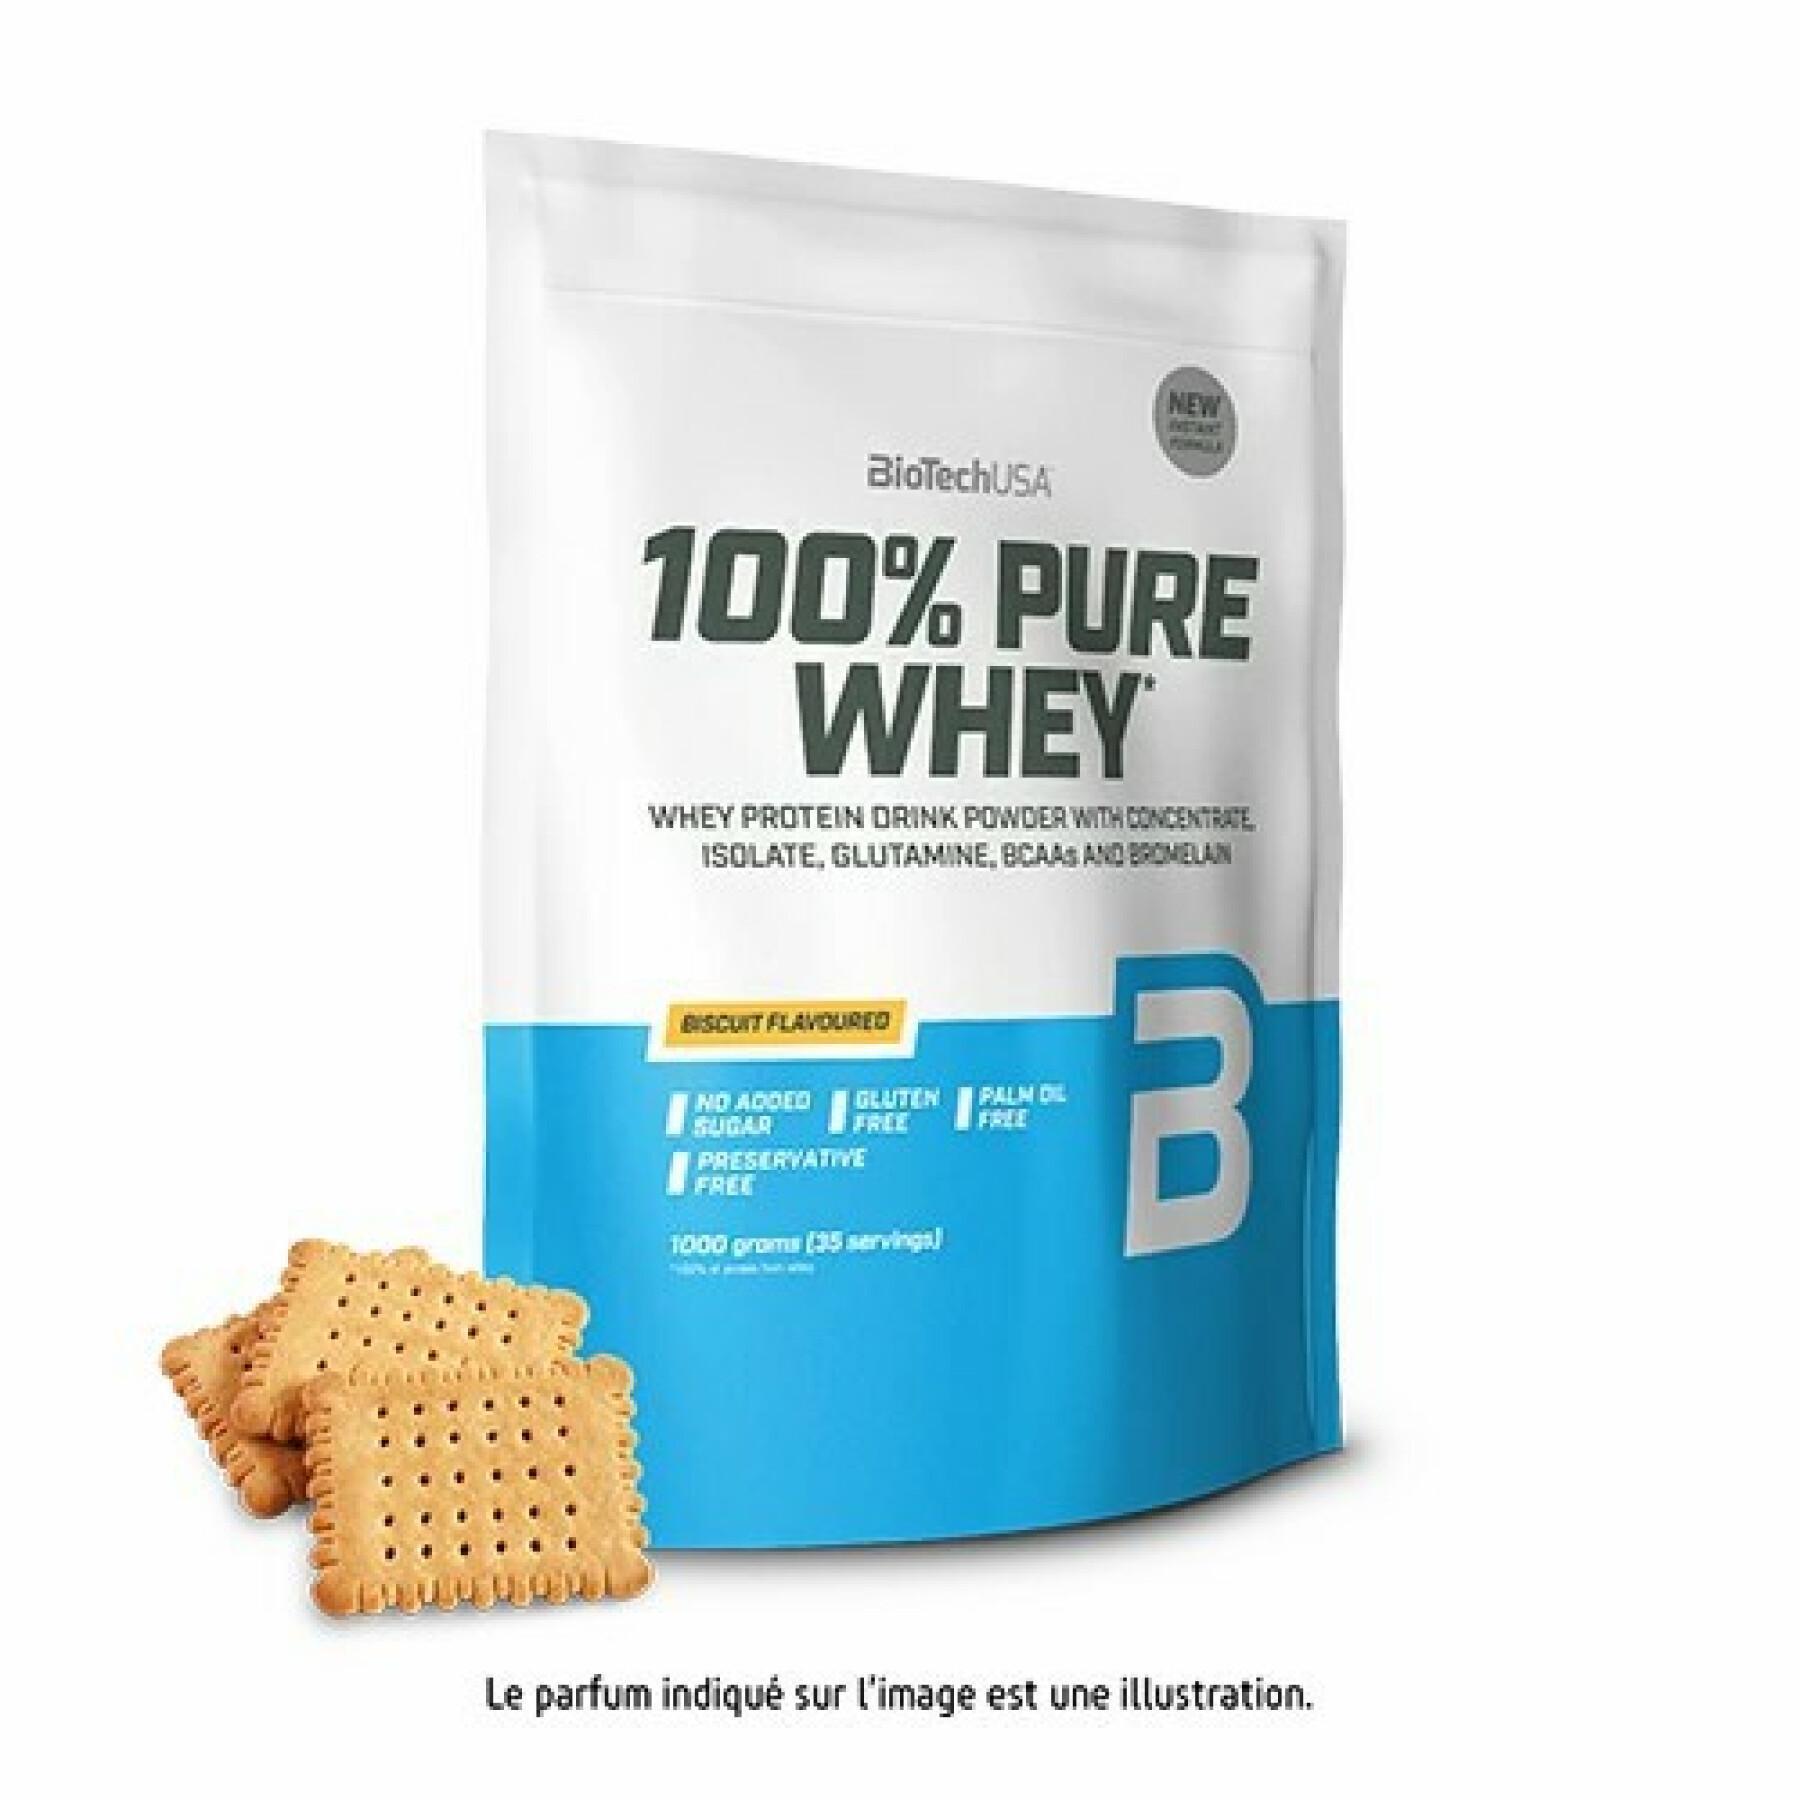 Lot of 10 bags of 100% pure whey protein Biotech USA - Biscuit - 1kg